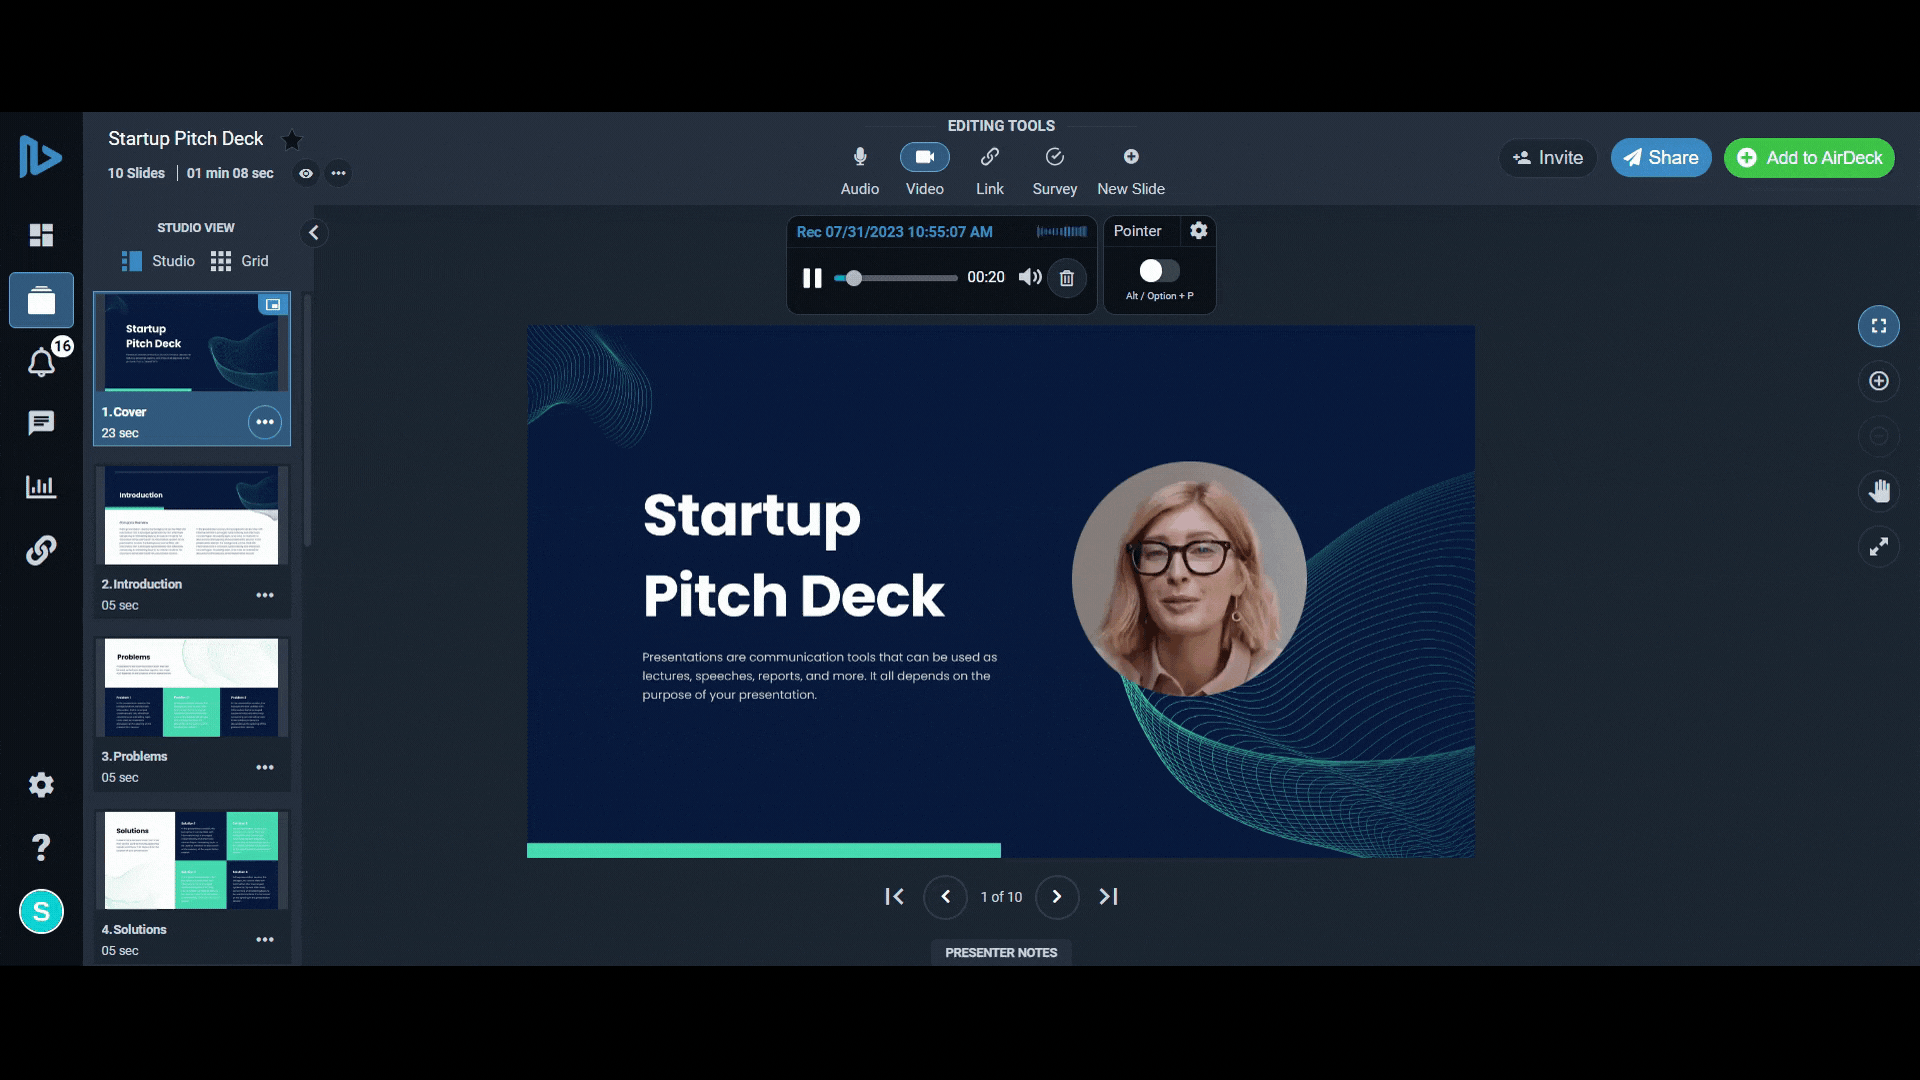 gif of a woman speaking over a pitch deck presentation using AirDeck